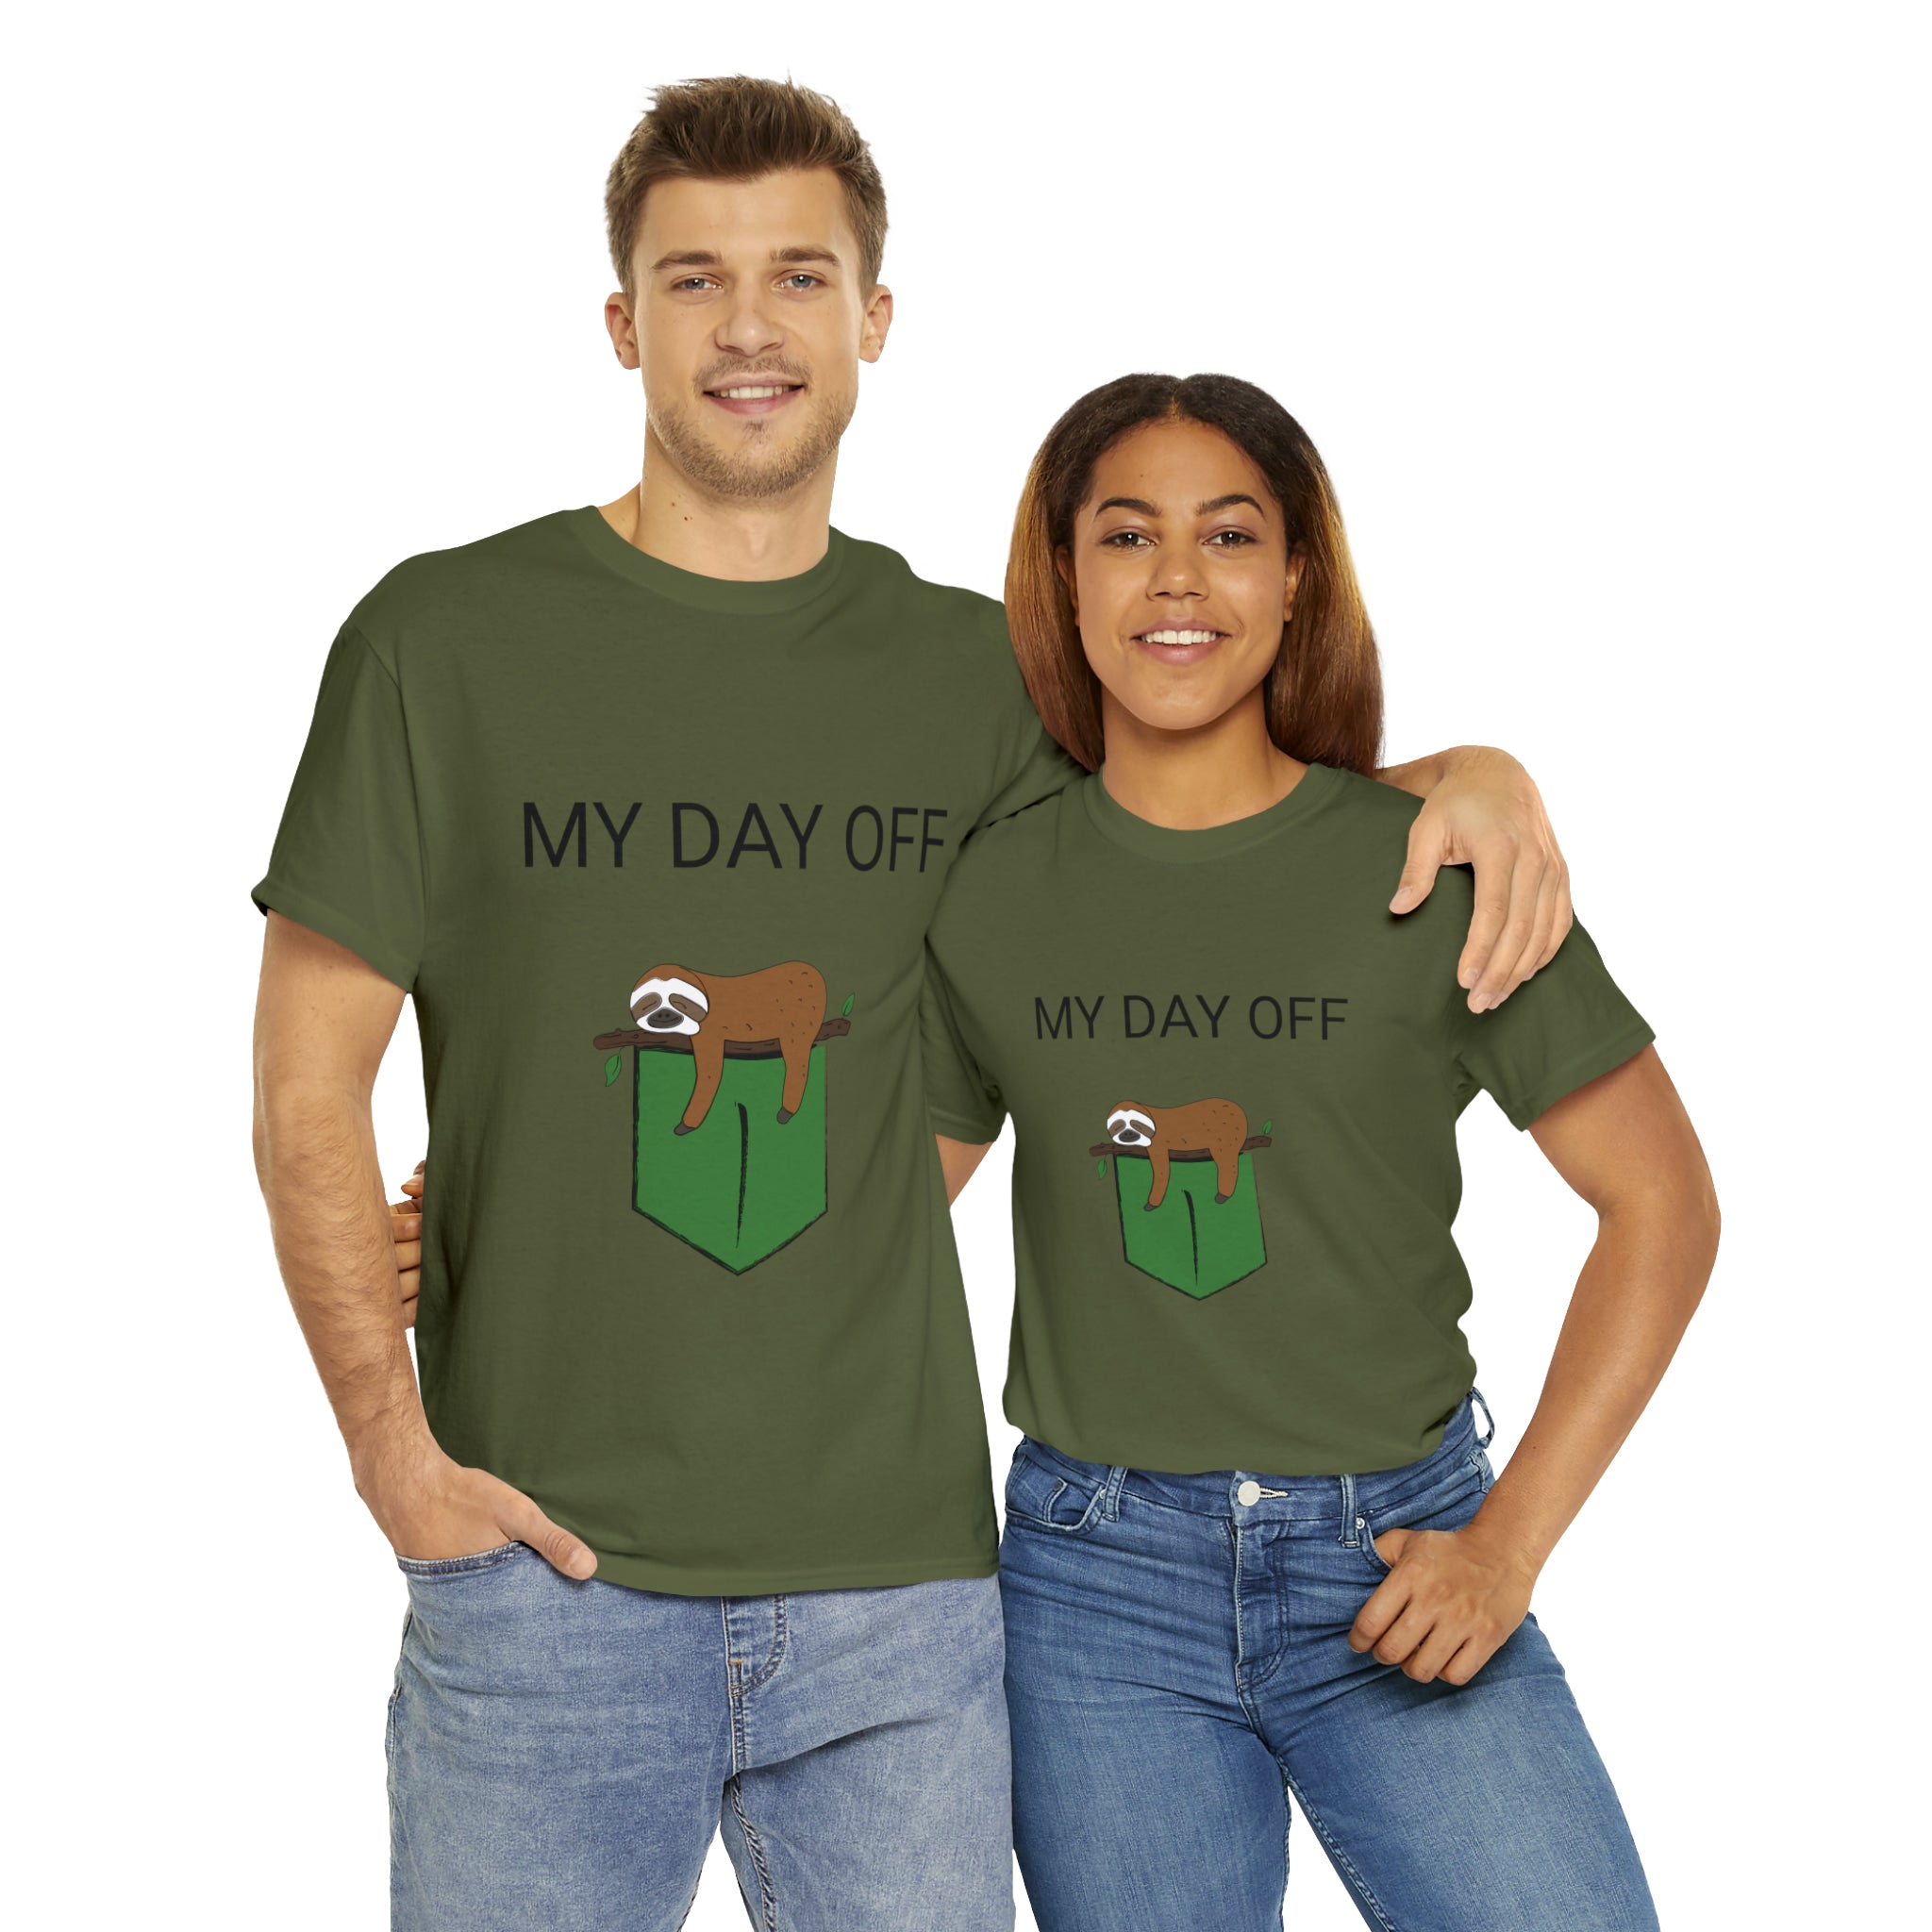 Lazy my day off  Unisex Heavy Cotton Tee funny humor t shirt for men and women